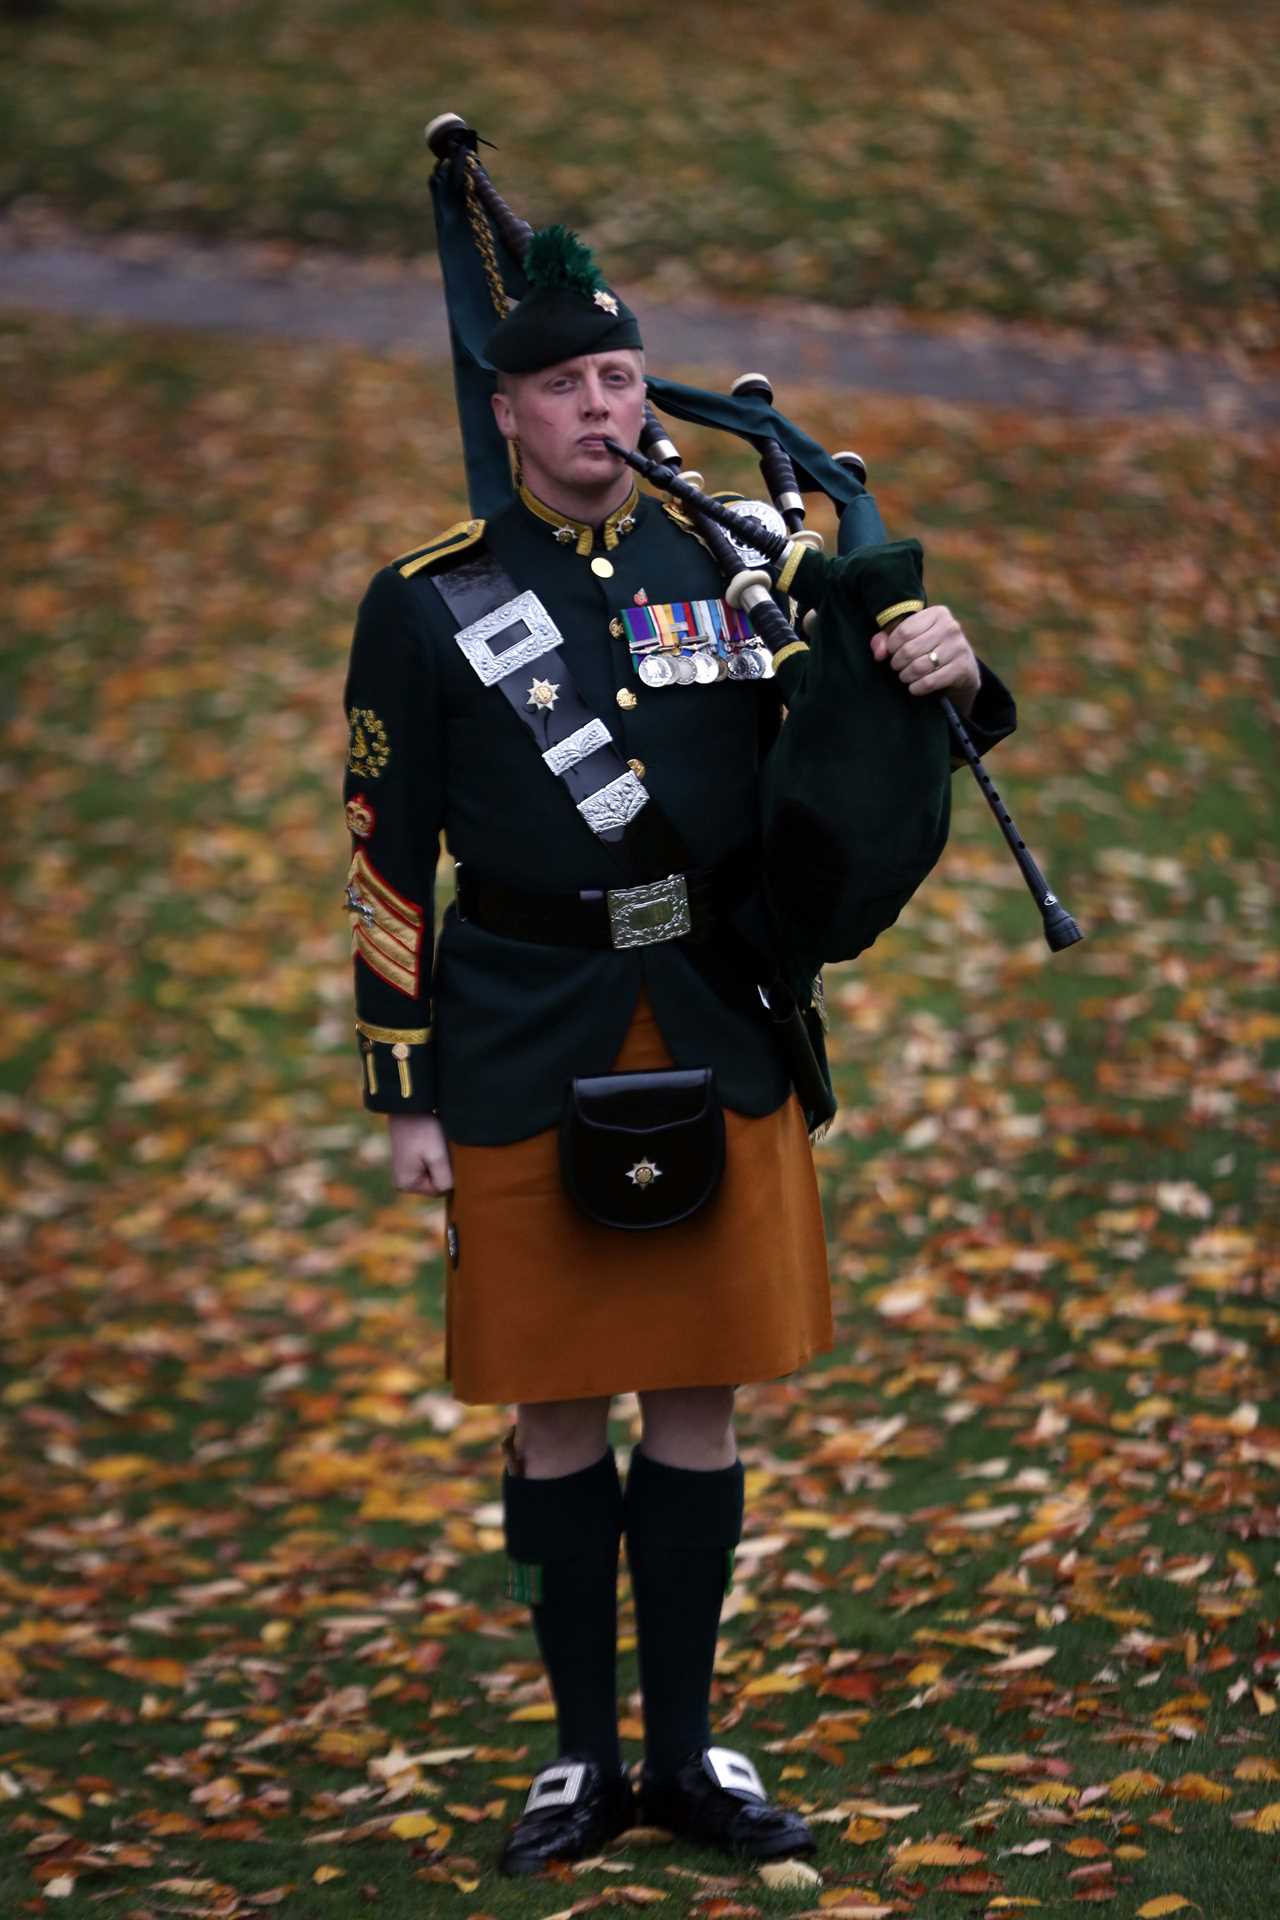 Lone piper will play as the Queen’s coffin is lowered into vault at Windsor, a detail approved by the Queen